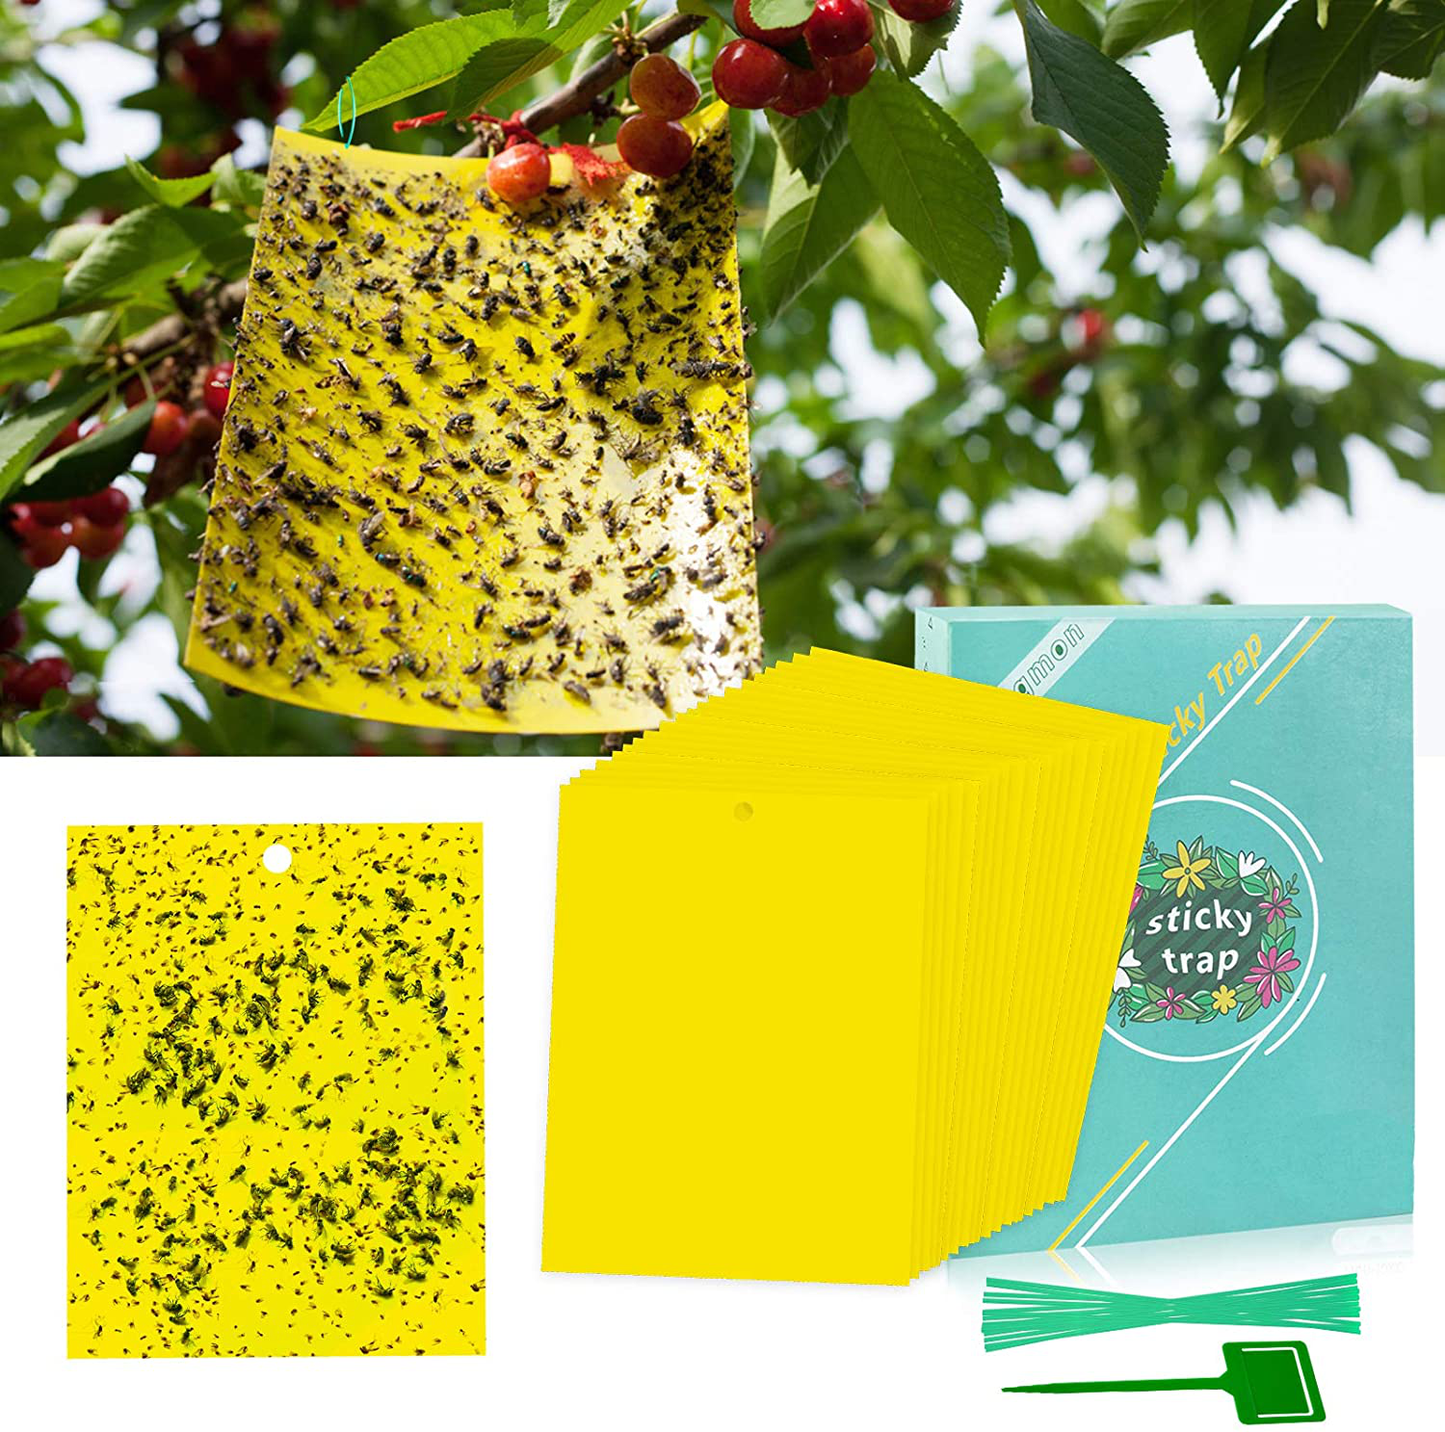 48 Pack Sticky Traps, Fruit Fly Gnat Trap for Indoor/Outdoor, Gnat Killer for Fungus Gnat, Fruit Fly and Other Insects, Protect The Plant